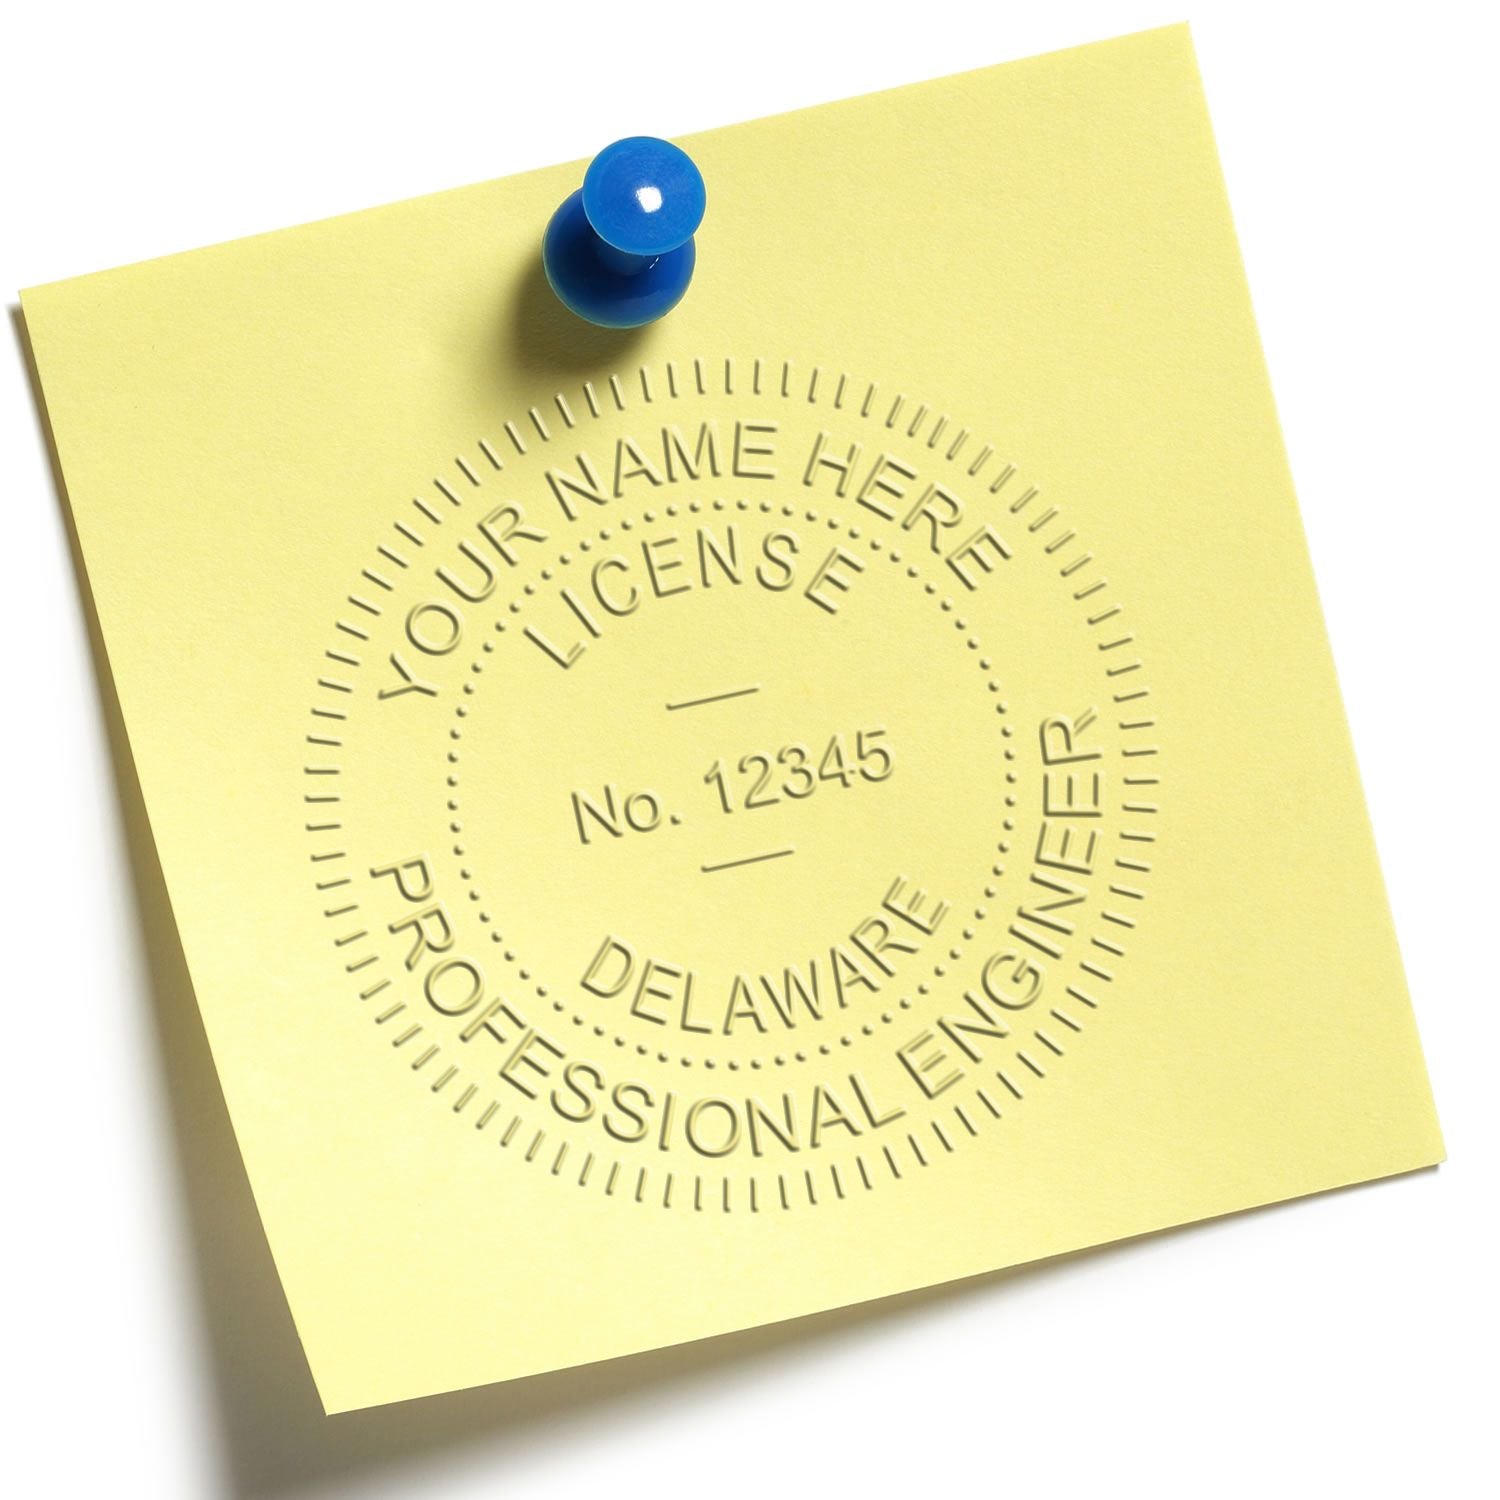 The main image for the State of Delaware Extended Long Reach Engineer Seal depicting a sample of the imprint and electronic files